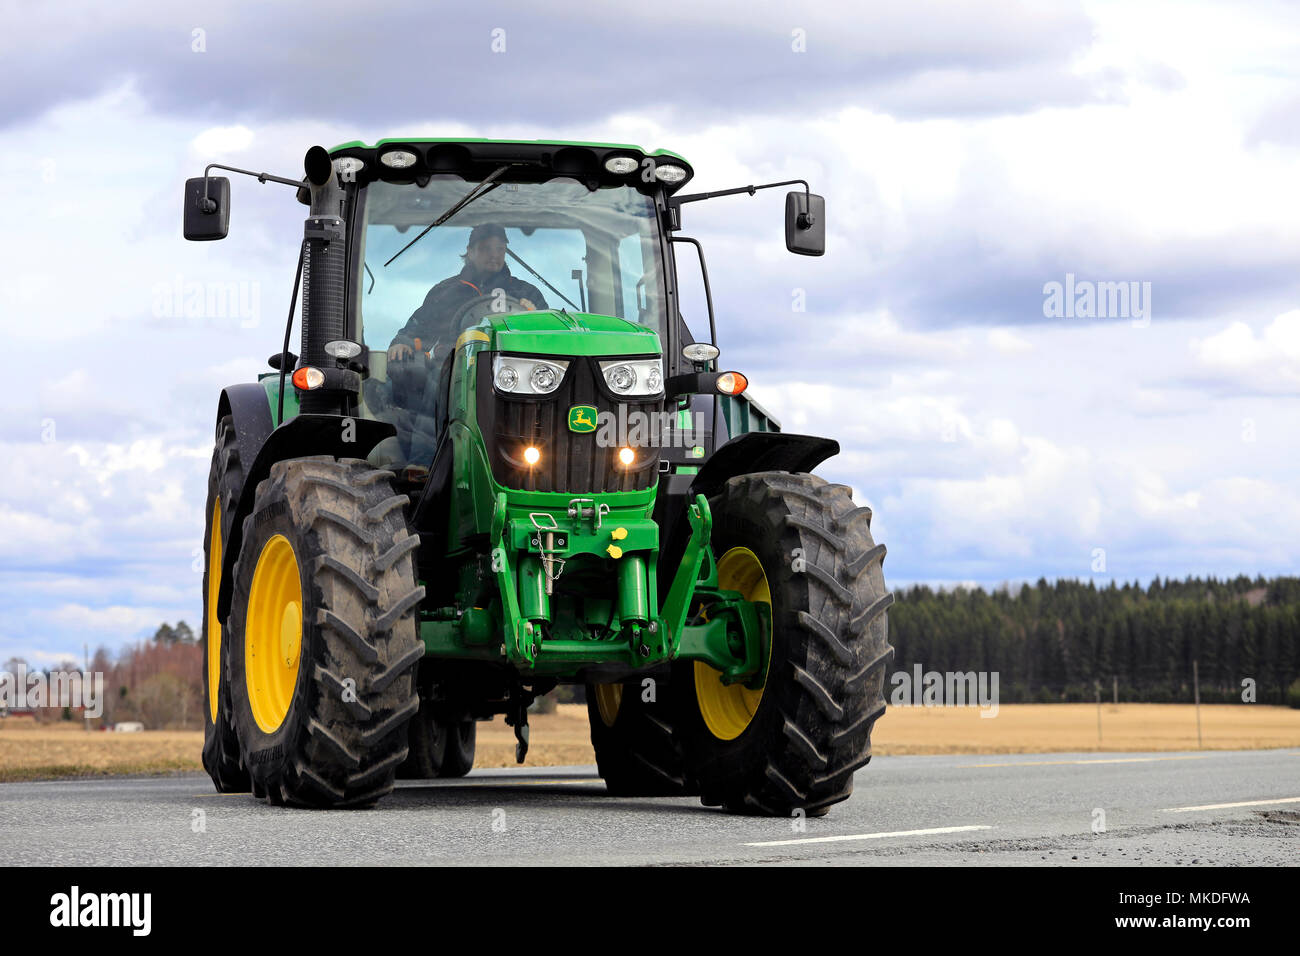 Farmer makes a right turn with John Deere 6150R tractor and agricultural trailer off main road. Jokioinen, Finland - April 30, 2018. Stock Photo